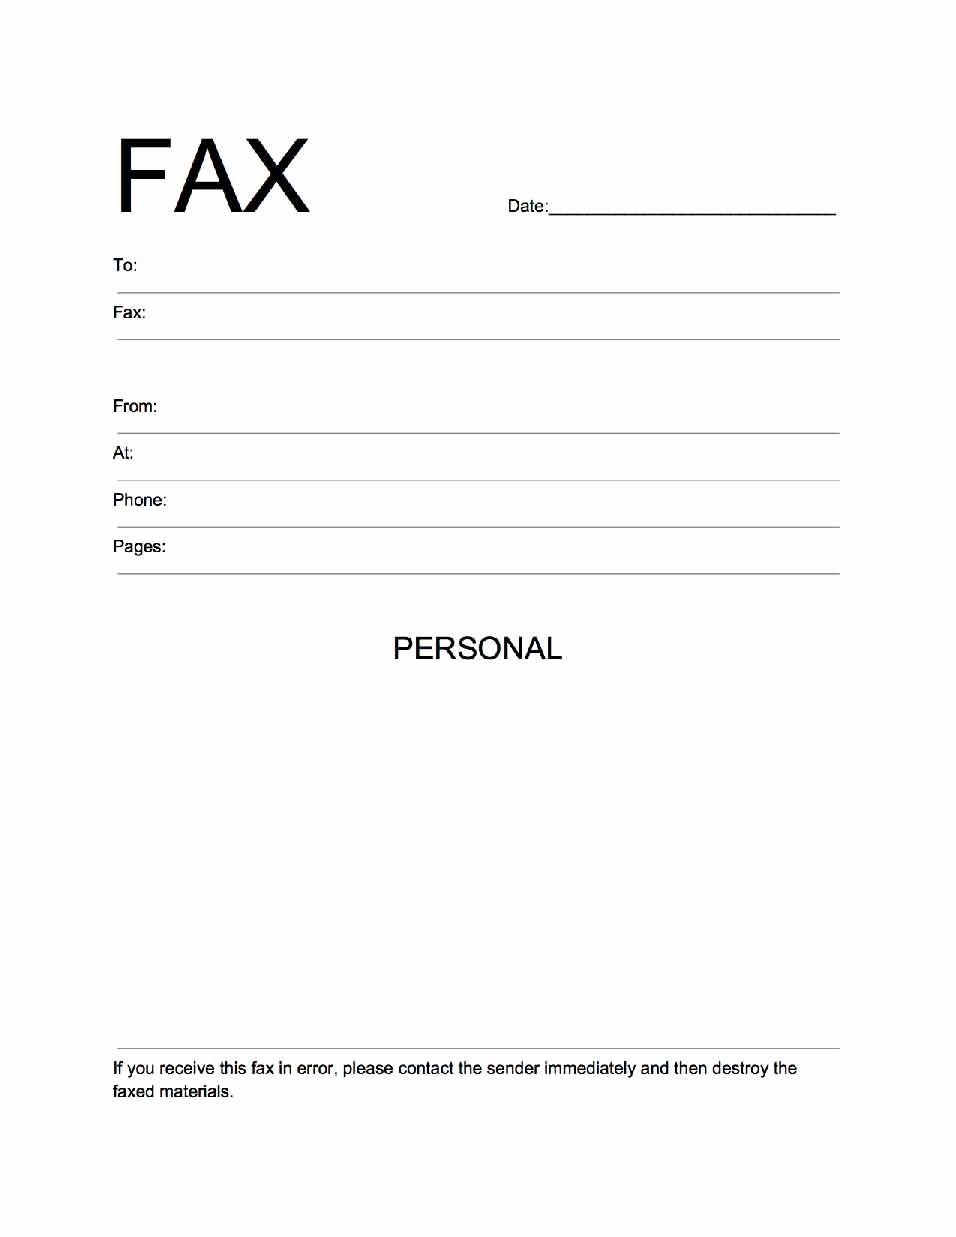 Standard Fax Cover Sheet Pdf Lovely Printable Standard Fax Cover Sheet Printable Pages